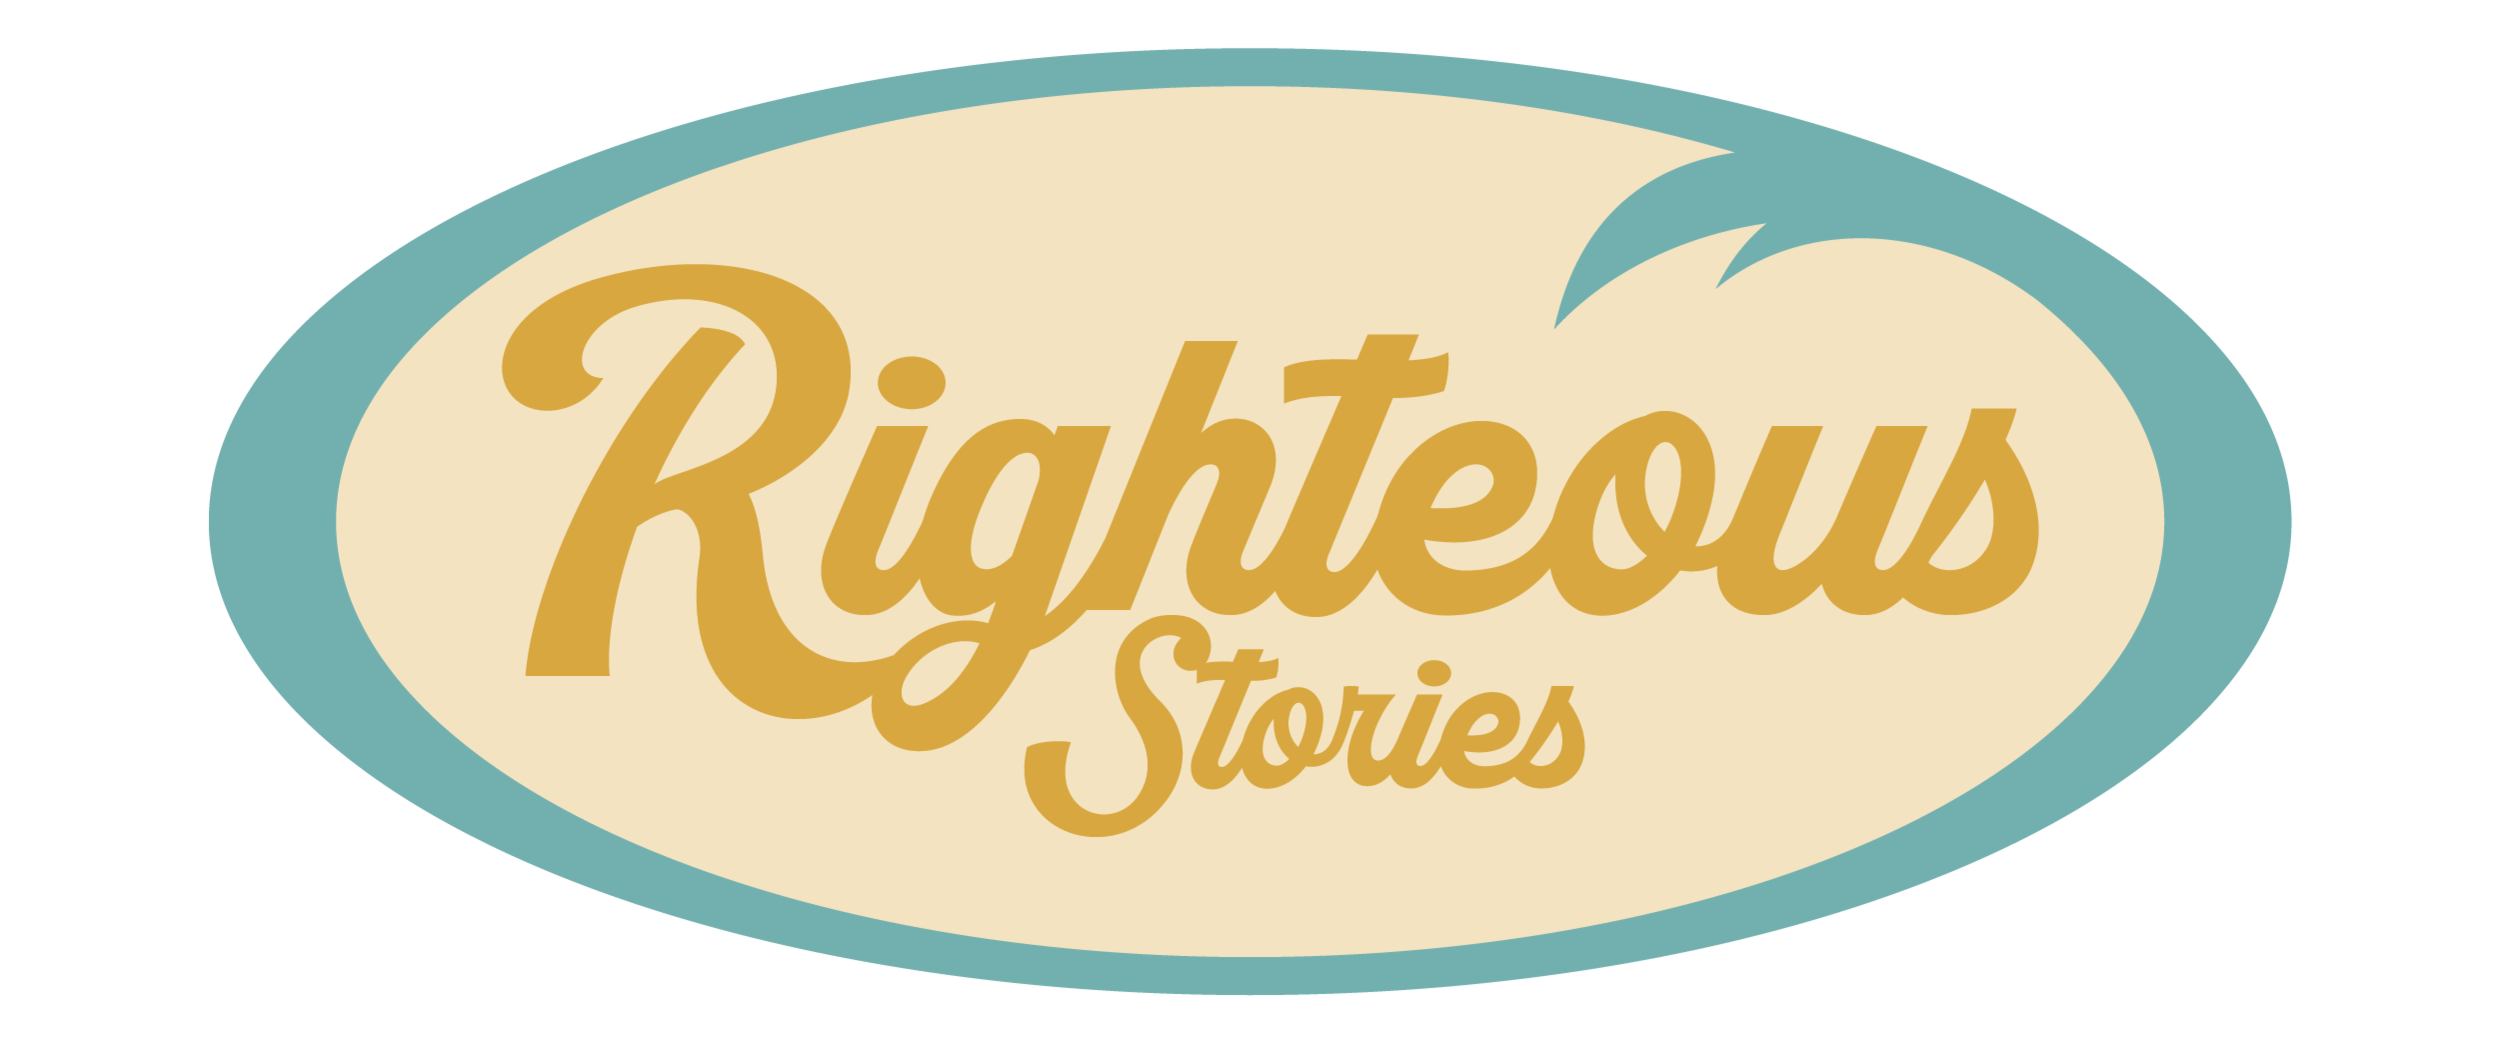 Righteous Stories Podcast